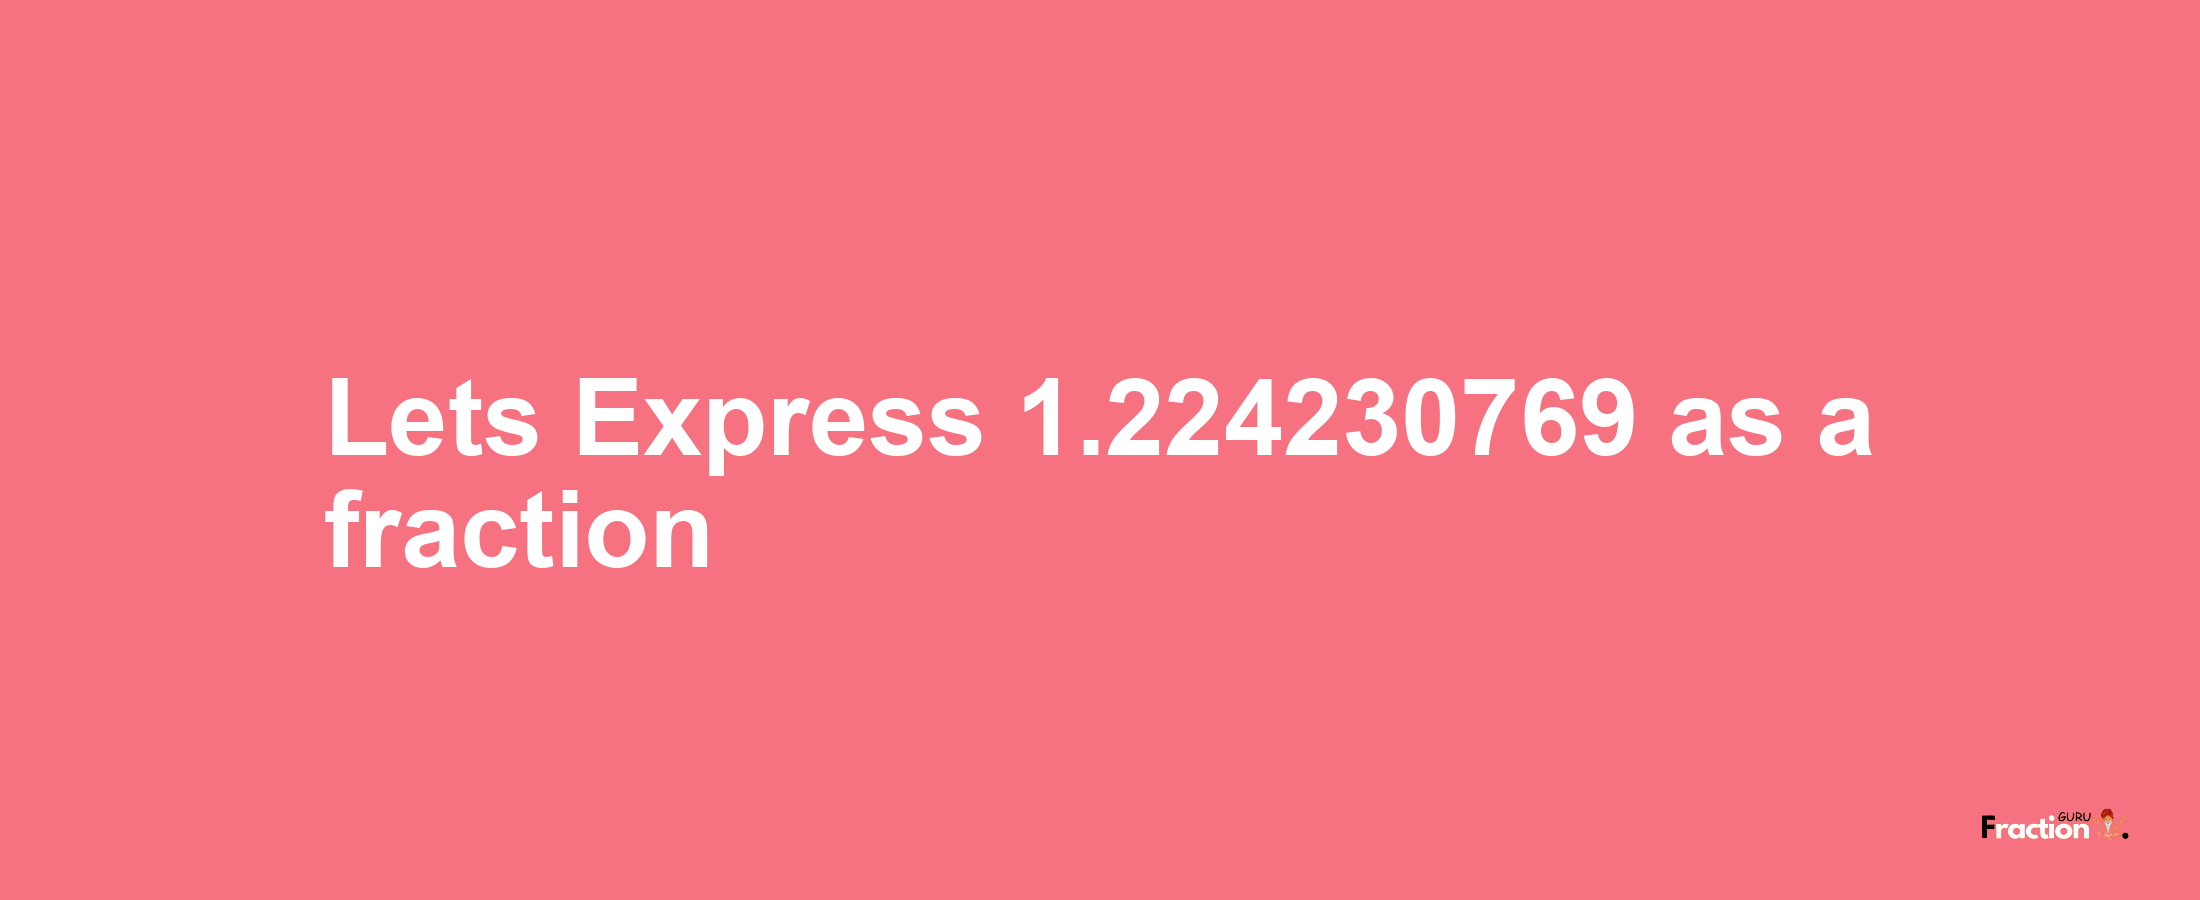 Lets Express 1.224230769 as afraction